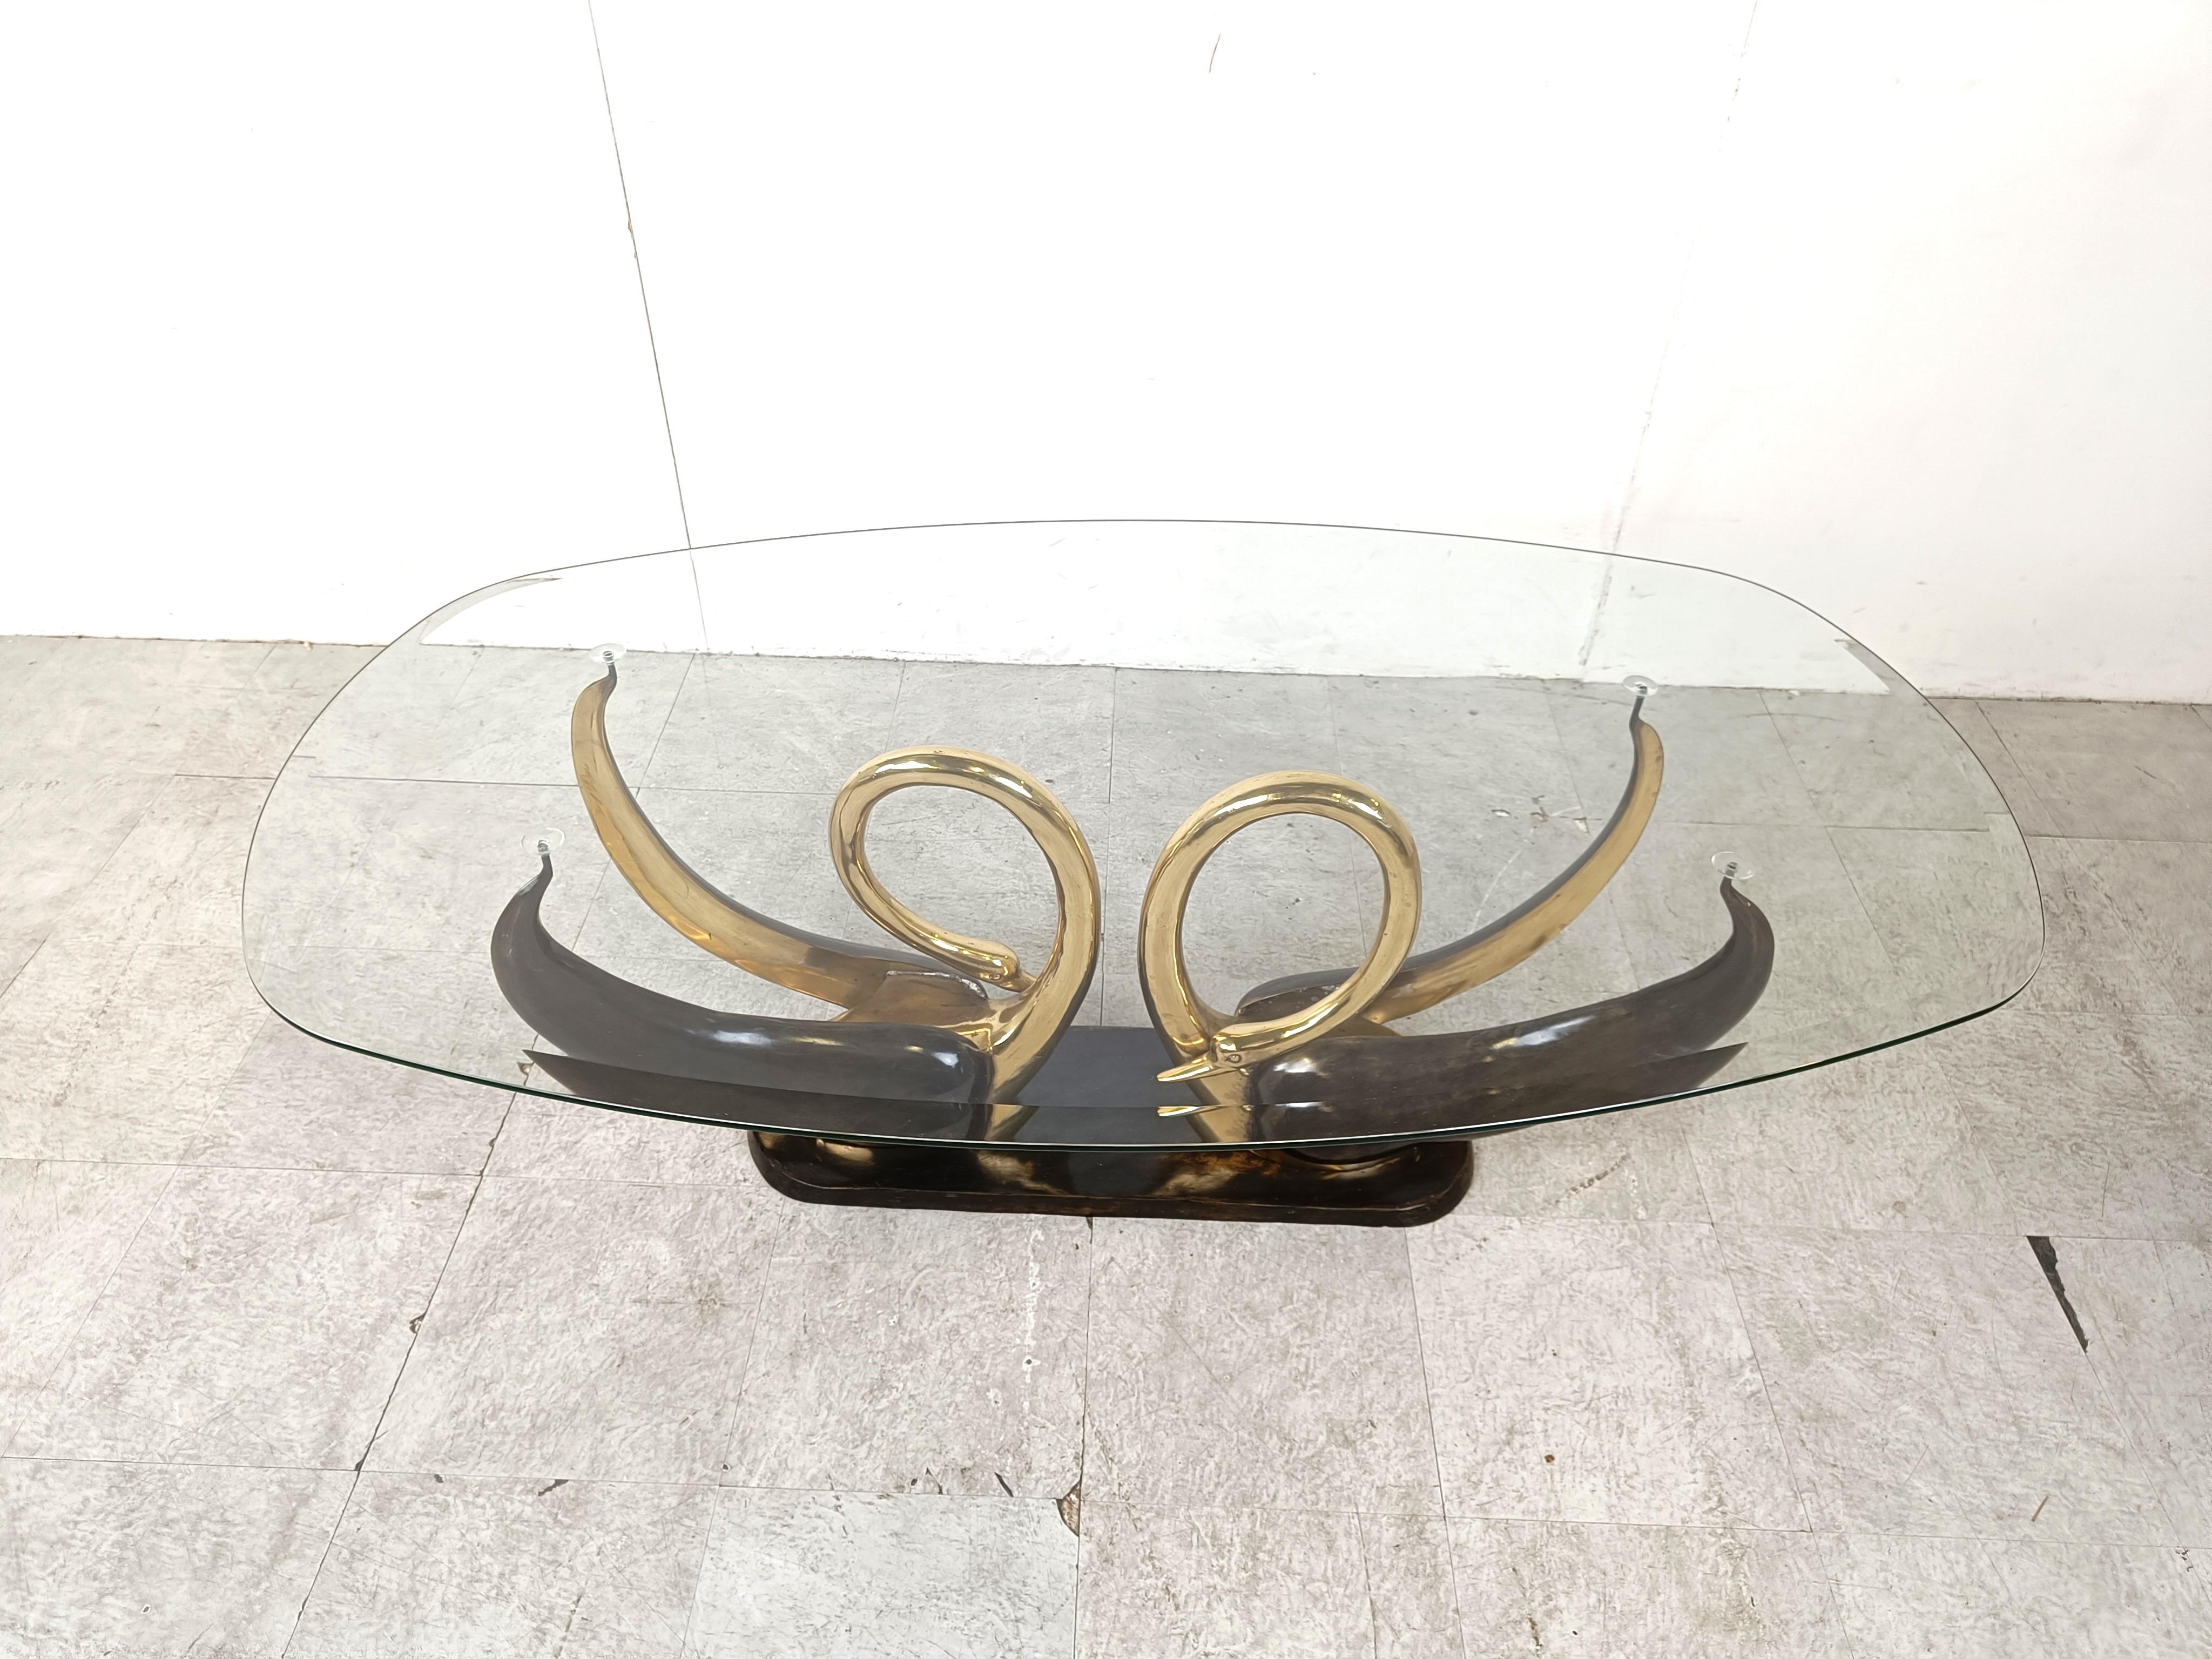 Elegant coffee table with a double swan base in brass with their curled necks.

Their wings serve as the table top supports.

The coffee table has an oval clear beveled glass top
​
This regency style coffee table surely is an eye catcher
​
Good